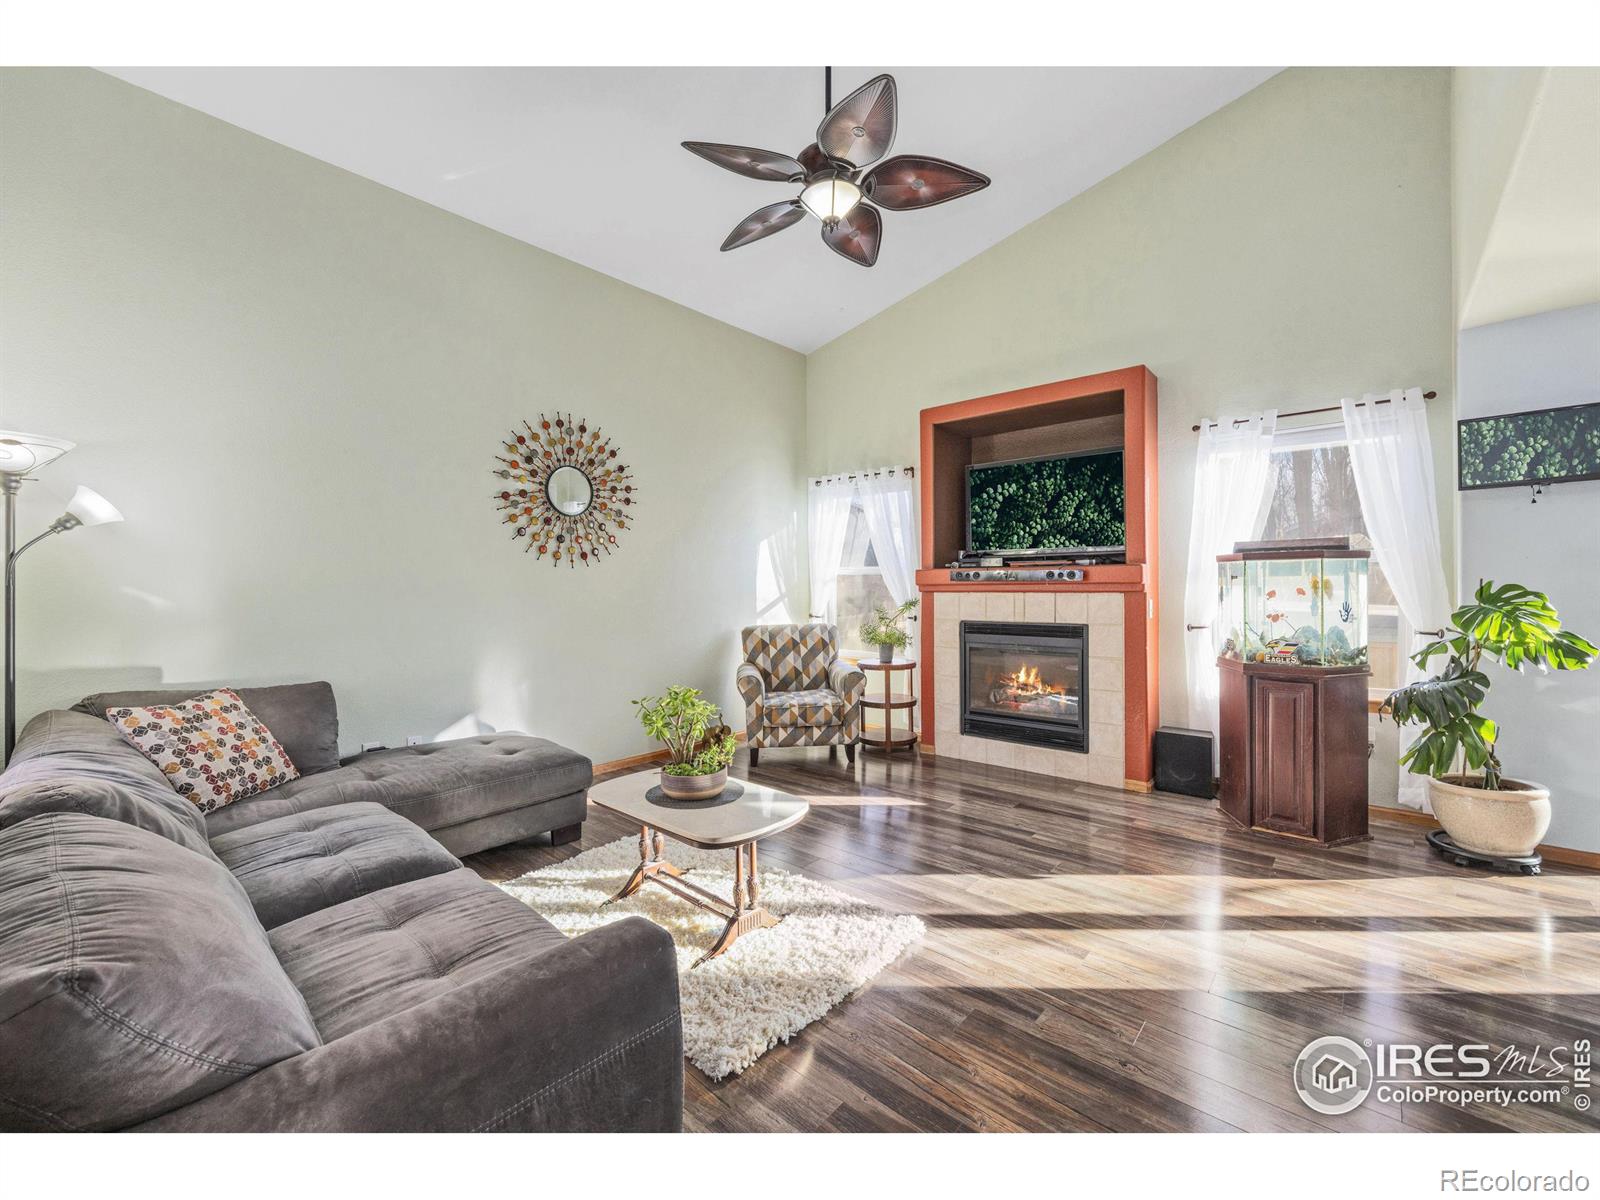 Report Image for 1859  Twin Lakes Circle,Loveland, Colorado